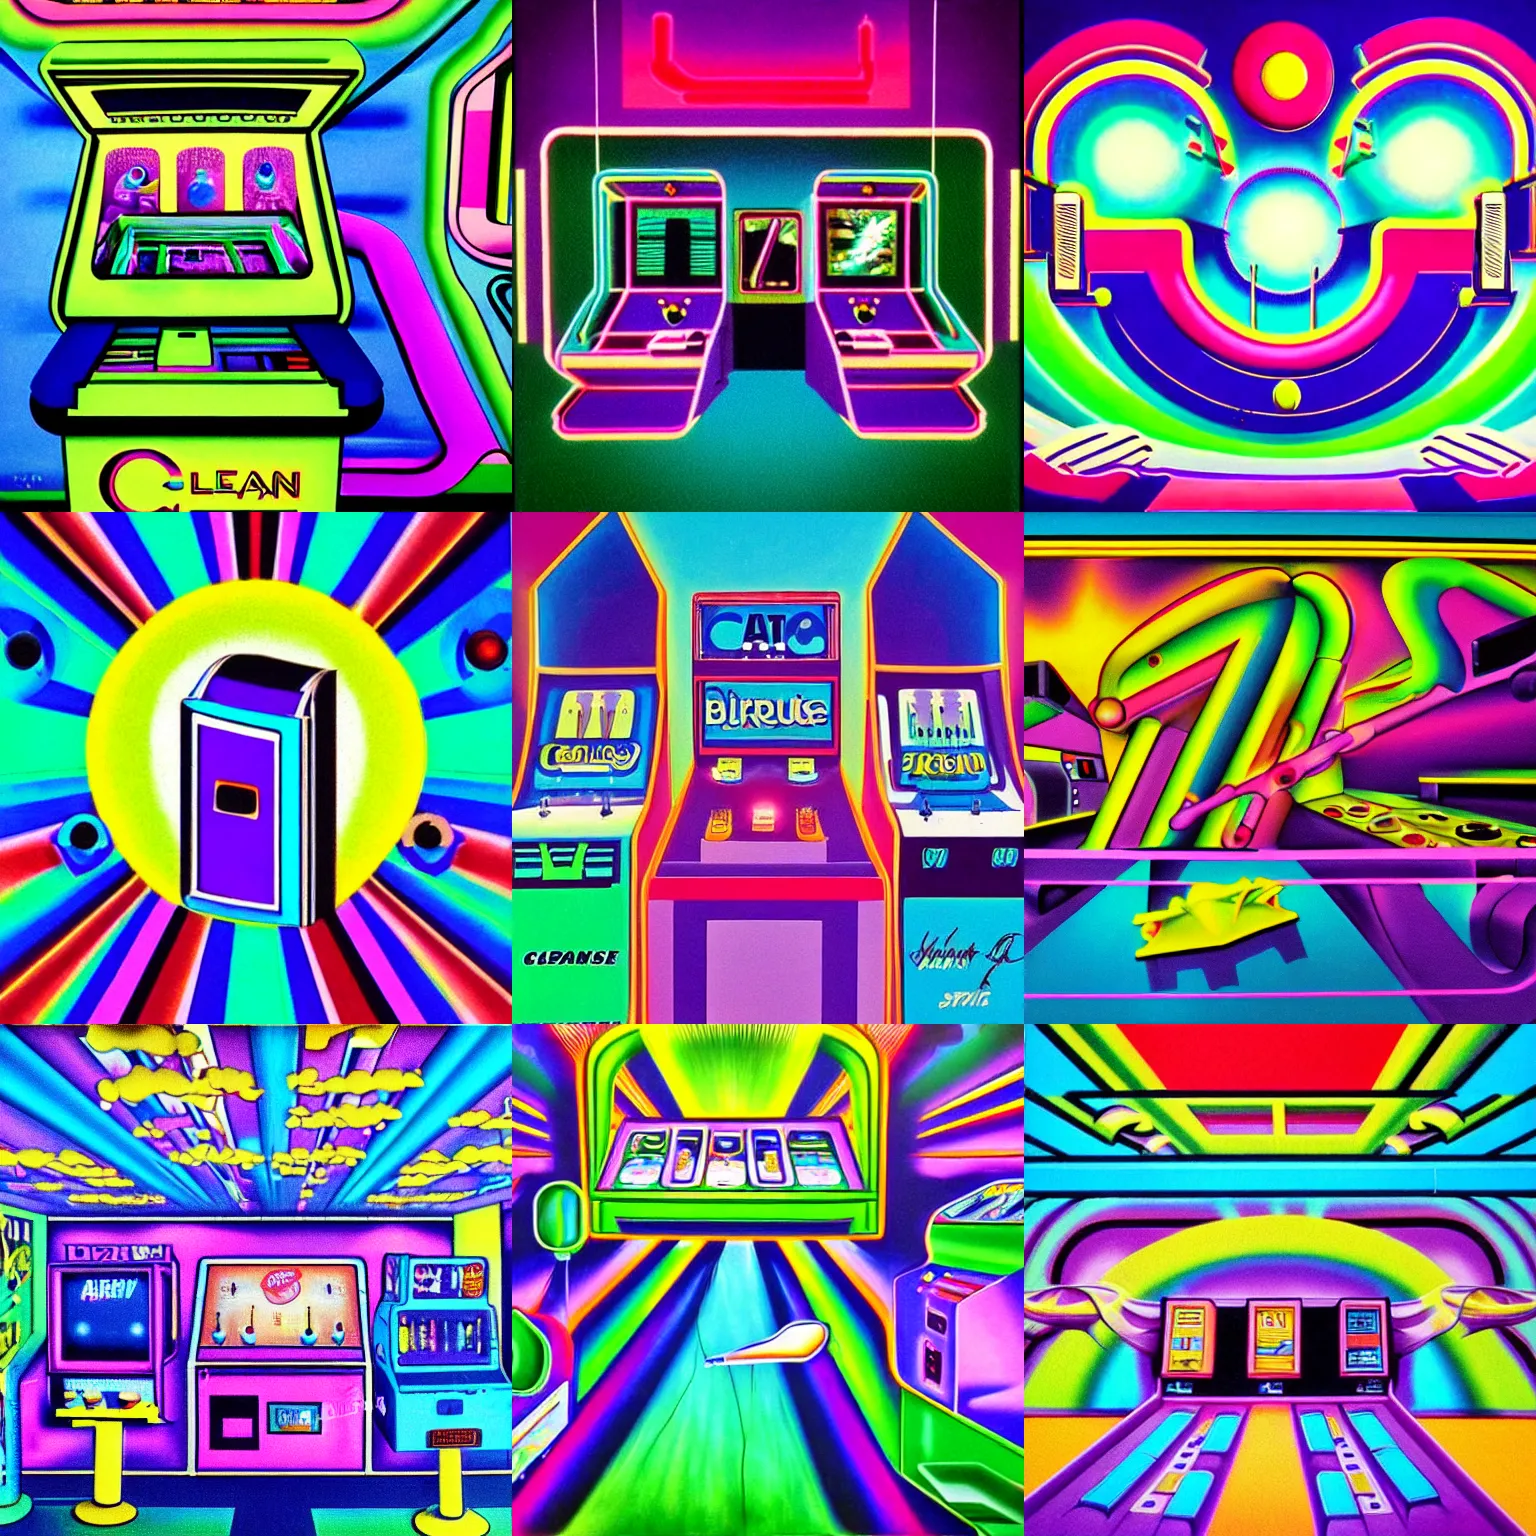 Prompt: clean 1980s airbrush art a surreal arcade filled with colorful objects and shapes, green blue and purple color scheme